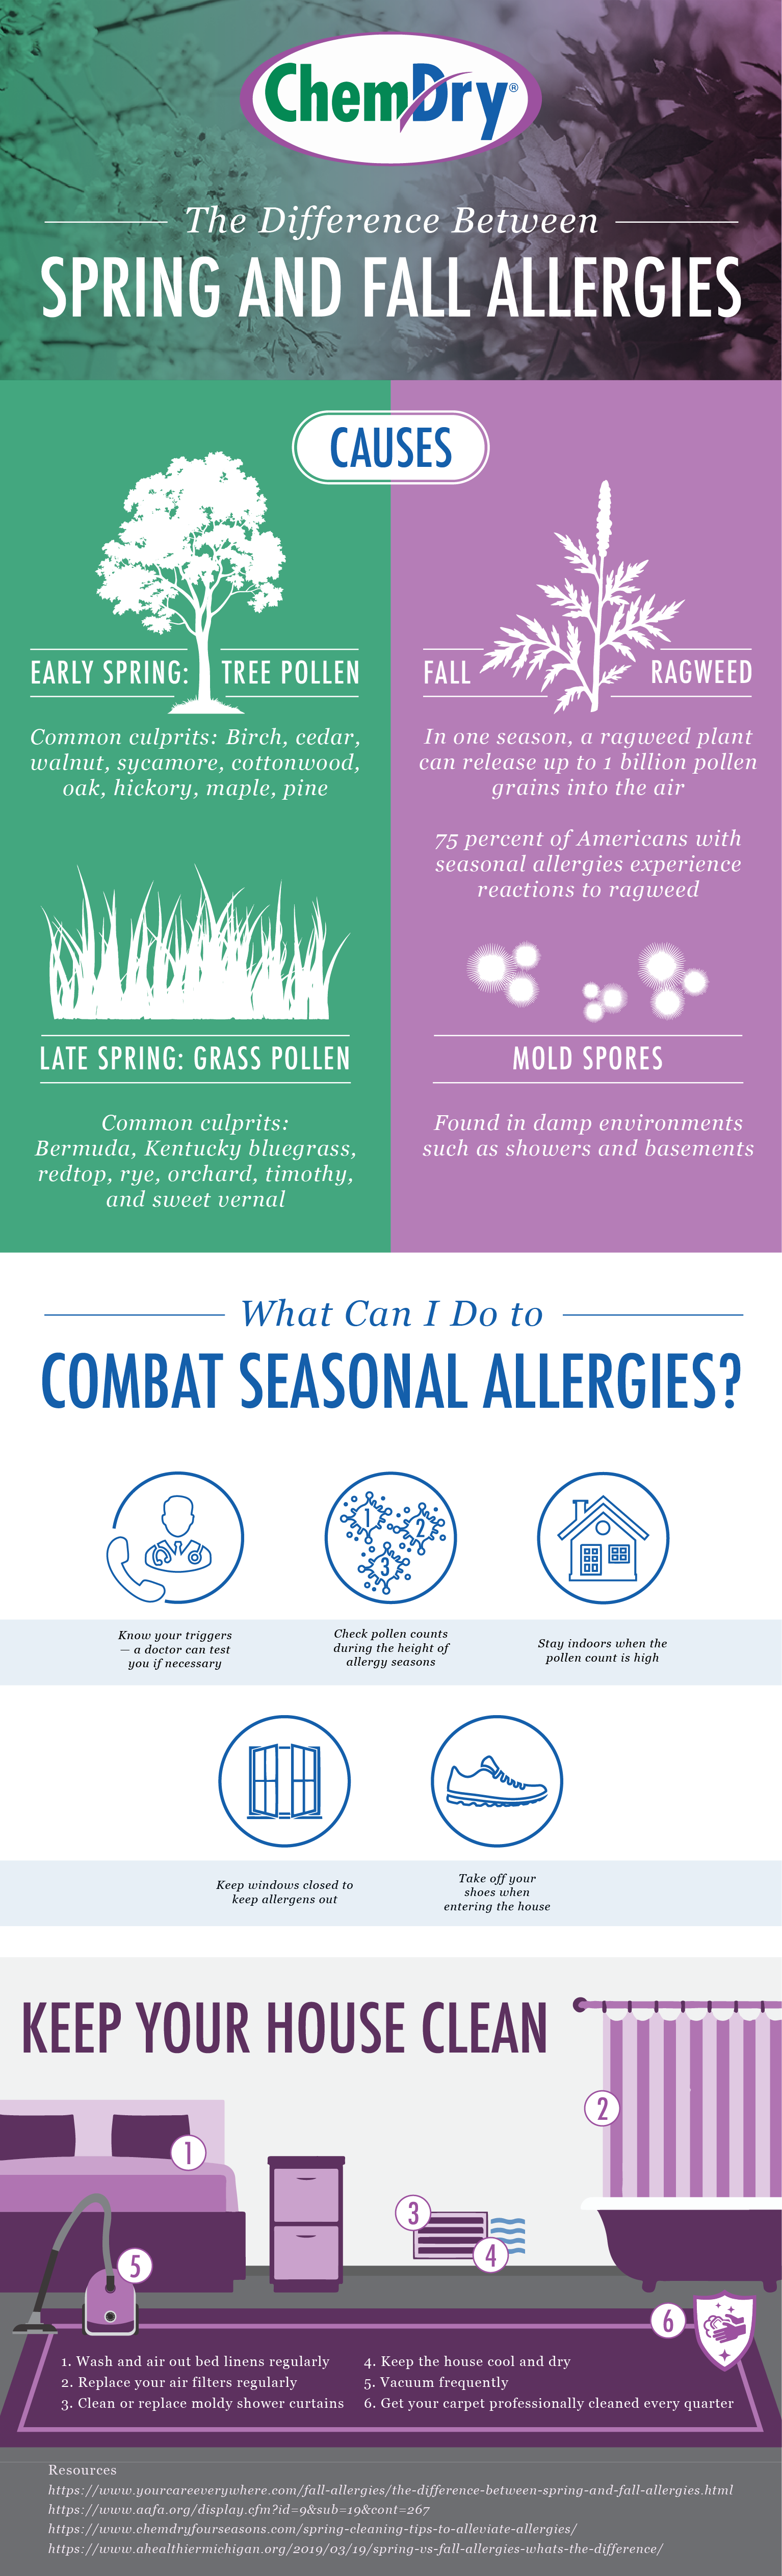 The Difference Between Spring and Fall Allergies